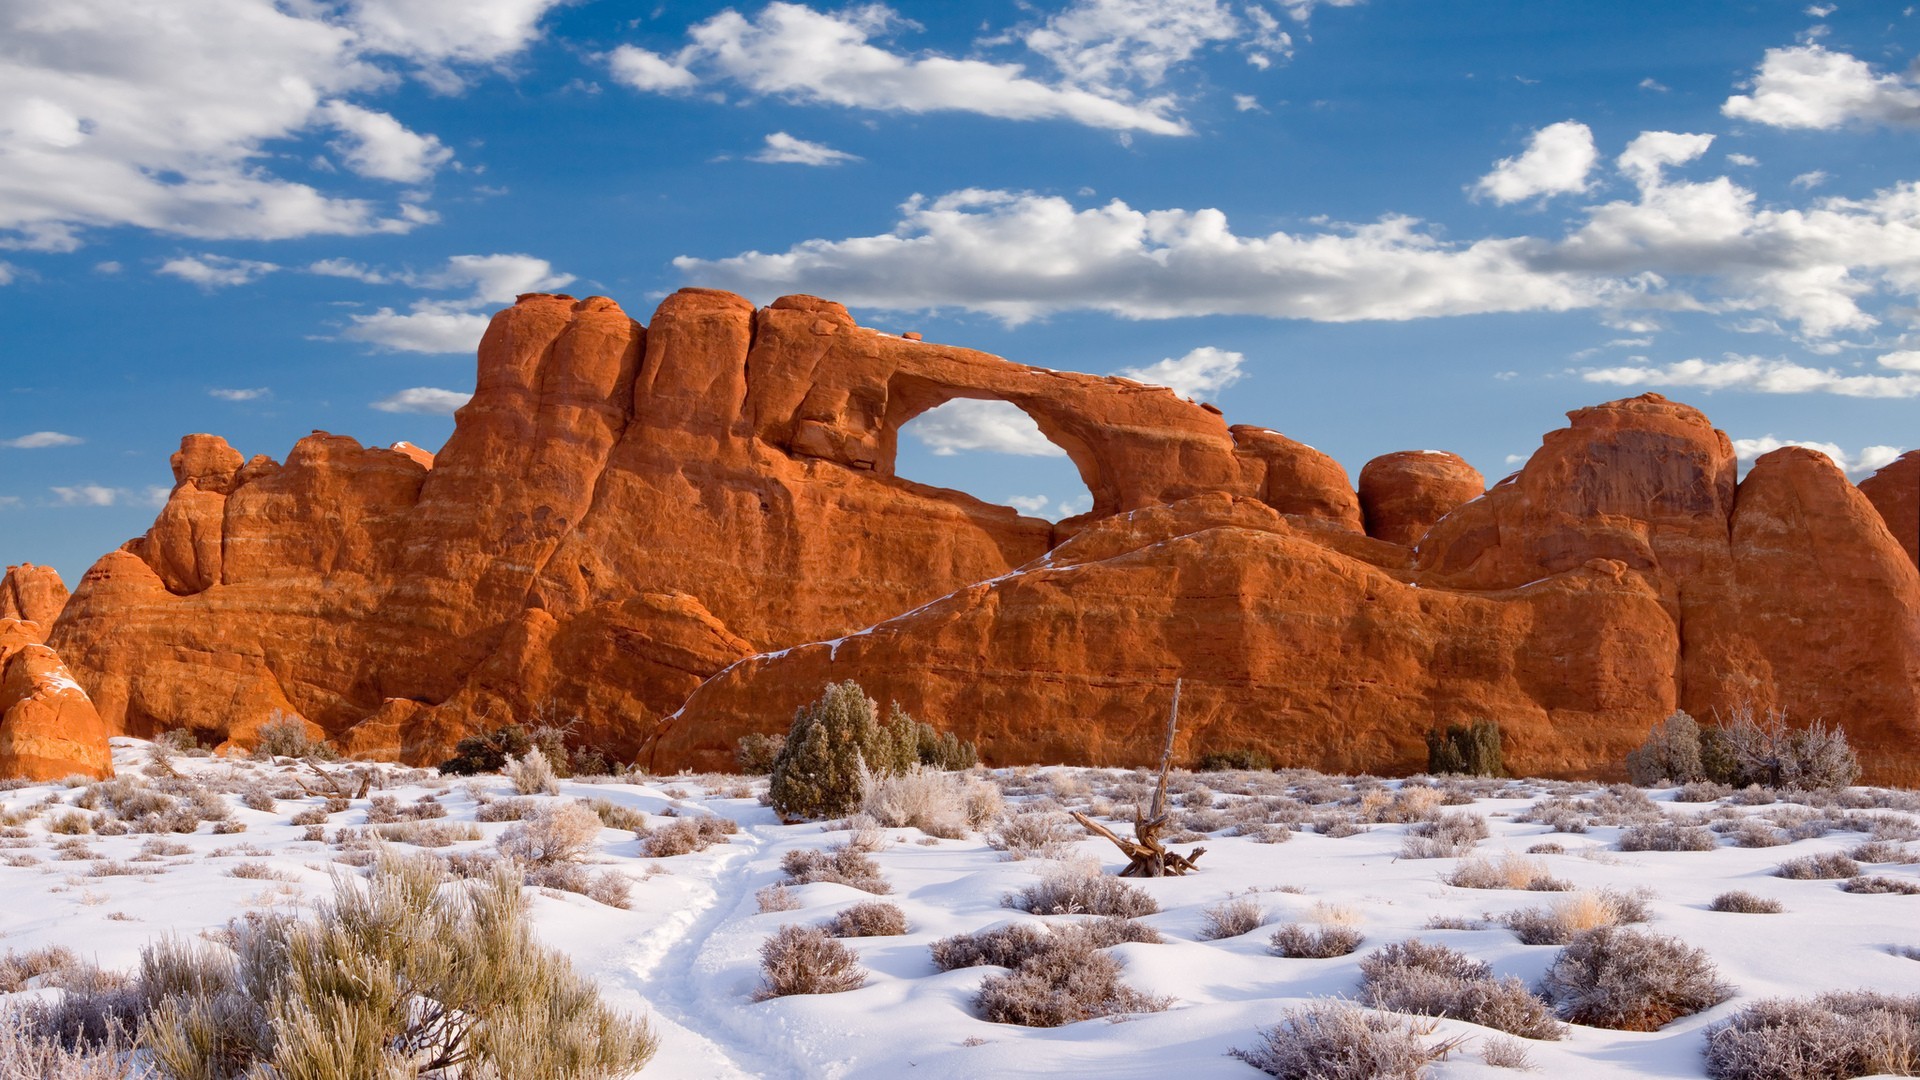 General 1920x1080 rocks Arches National Park Utah rock formation winter snow ice cold nature USA